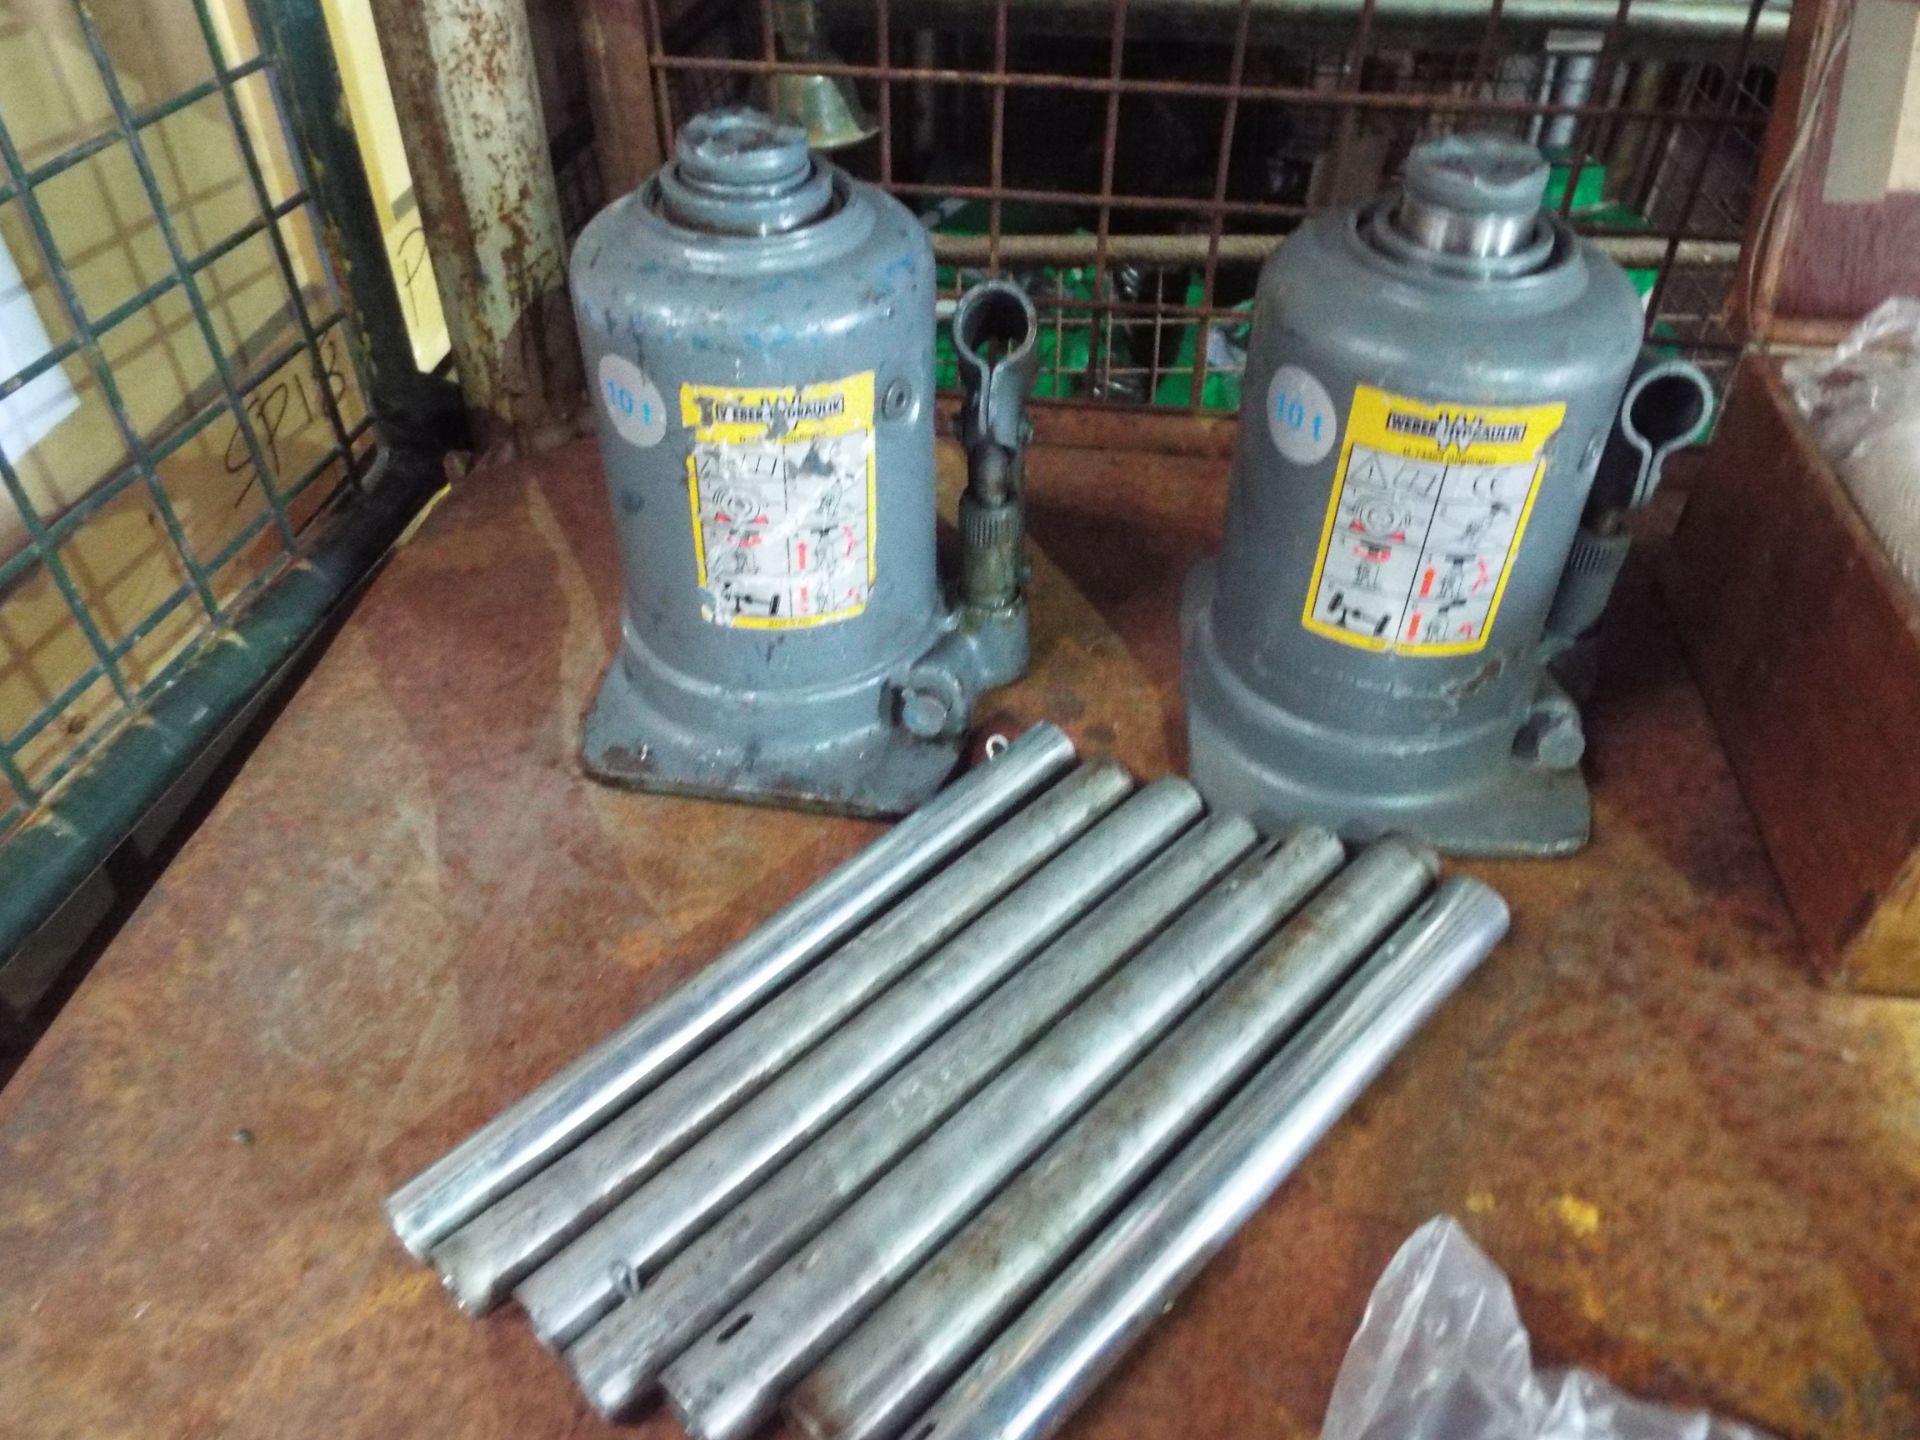 Mixed Stillage consisting of Jacks, Gauges, Pullers, Scales, Grease Gun - Image 2 of 9